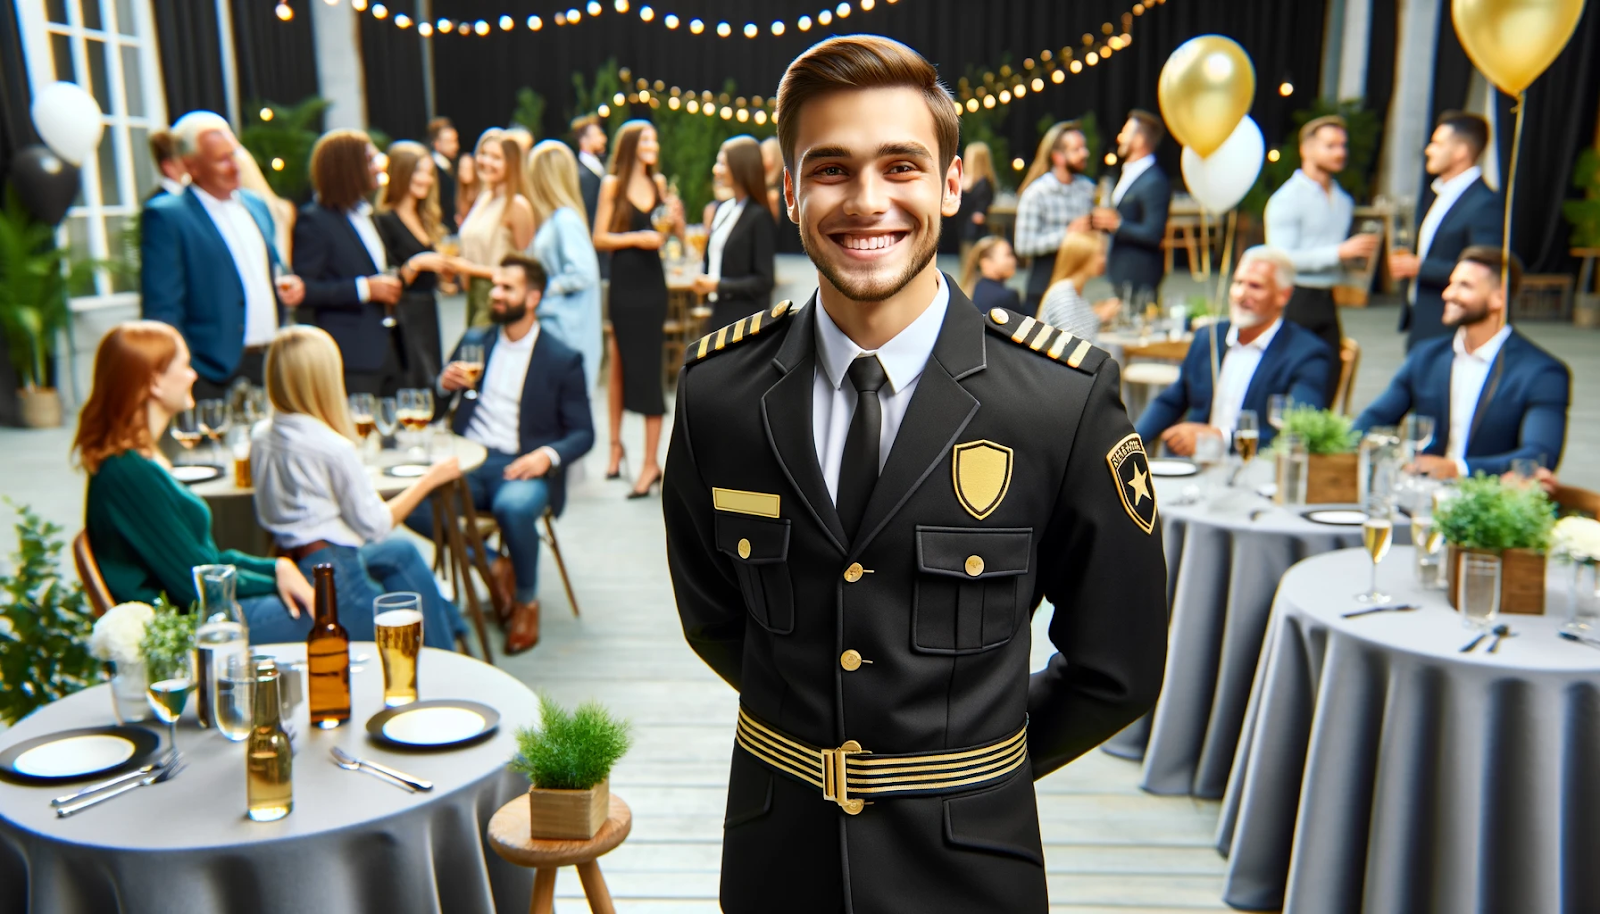 A cheerful security guard in a black and gold uniform oversees a lively event, ensuring safety and responsible alcohol consumption with a friendly demeanor.